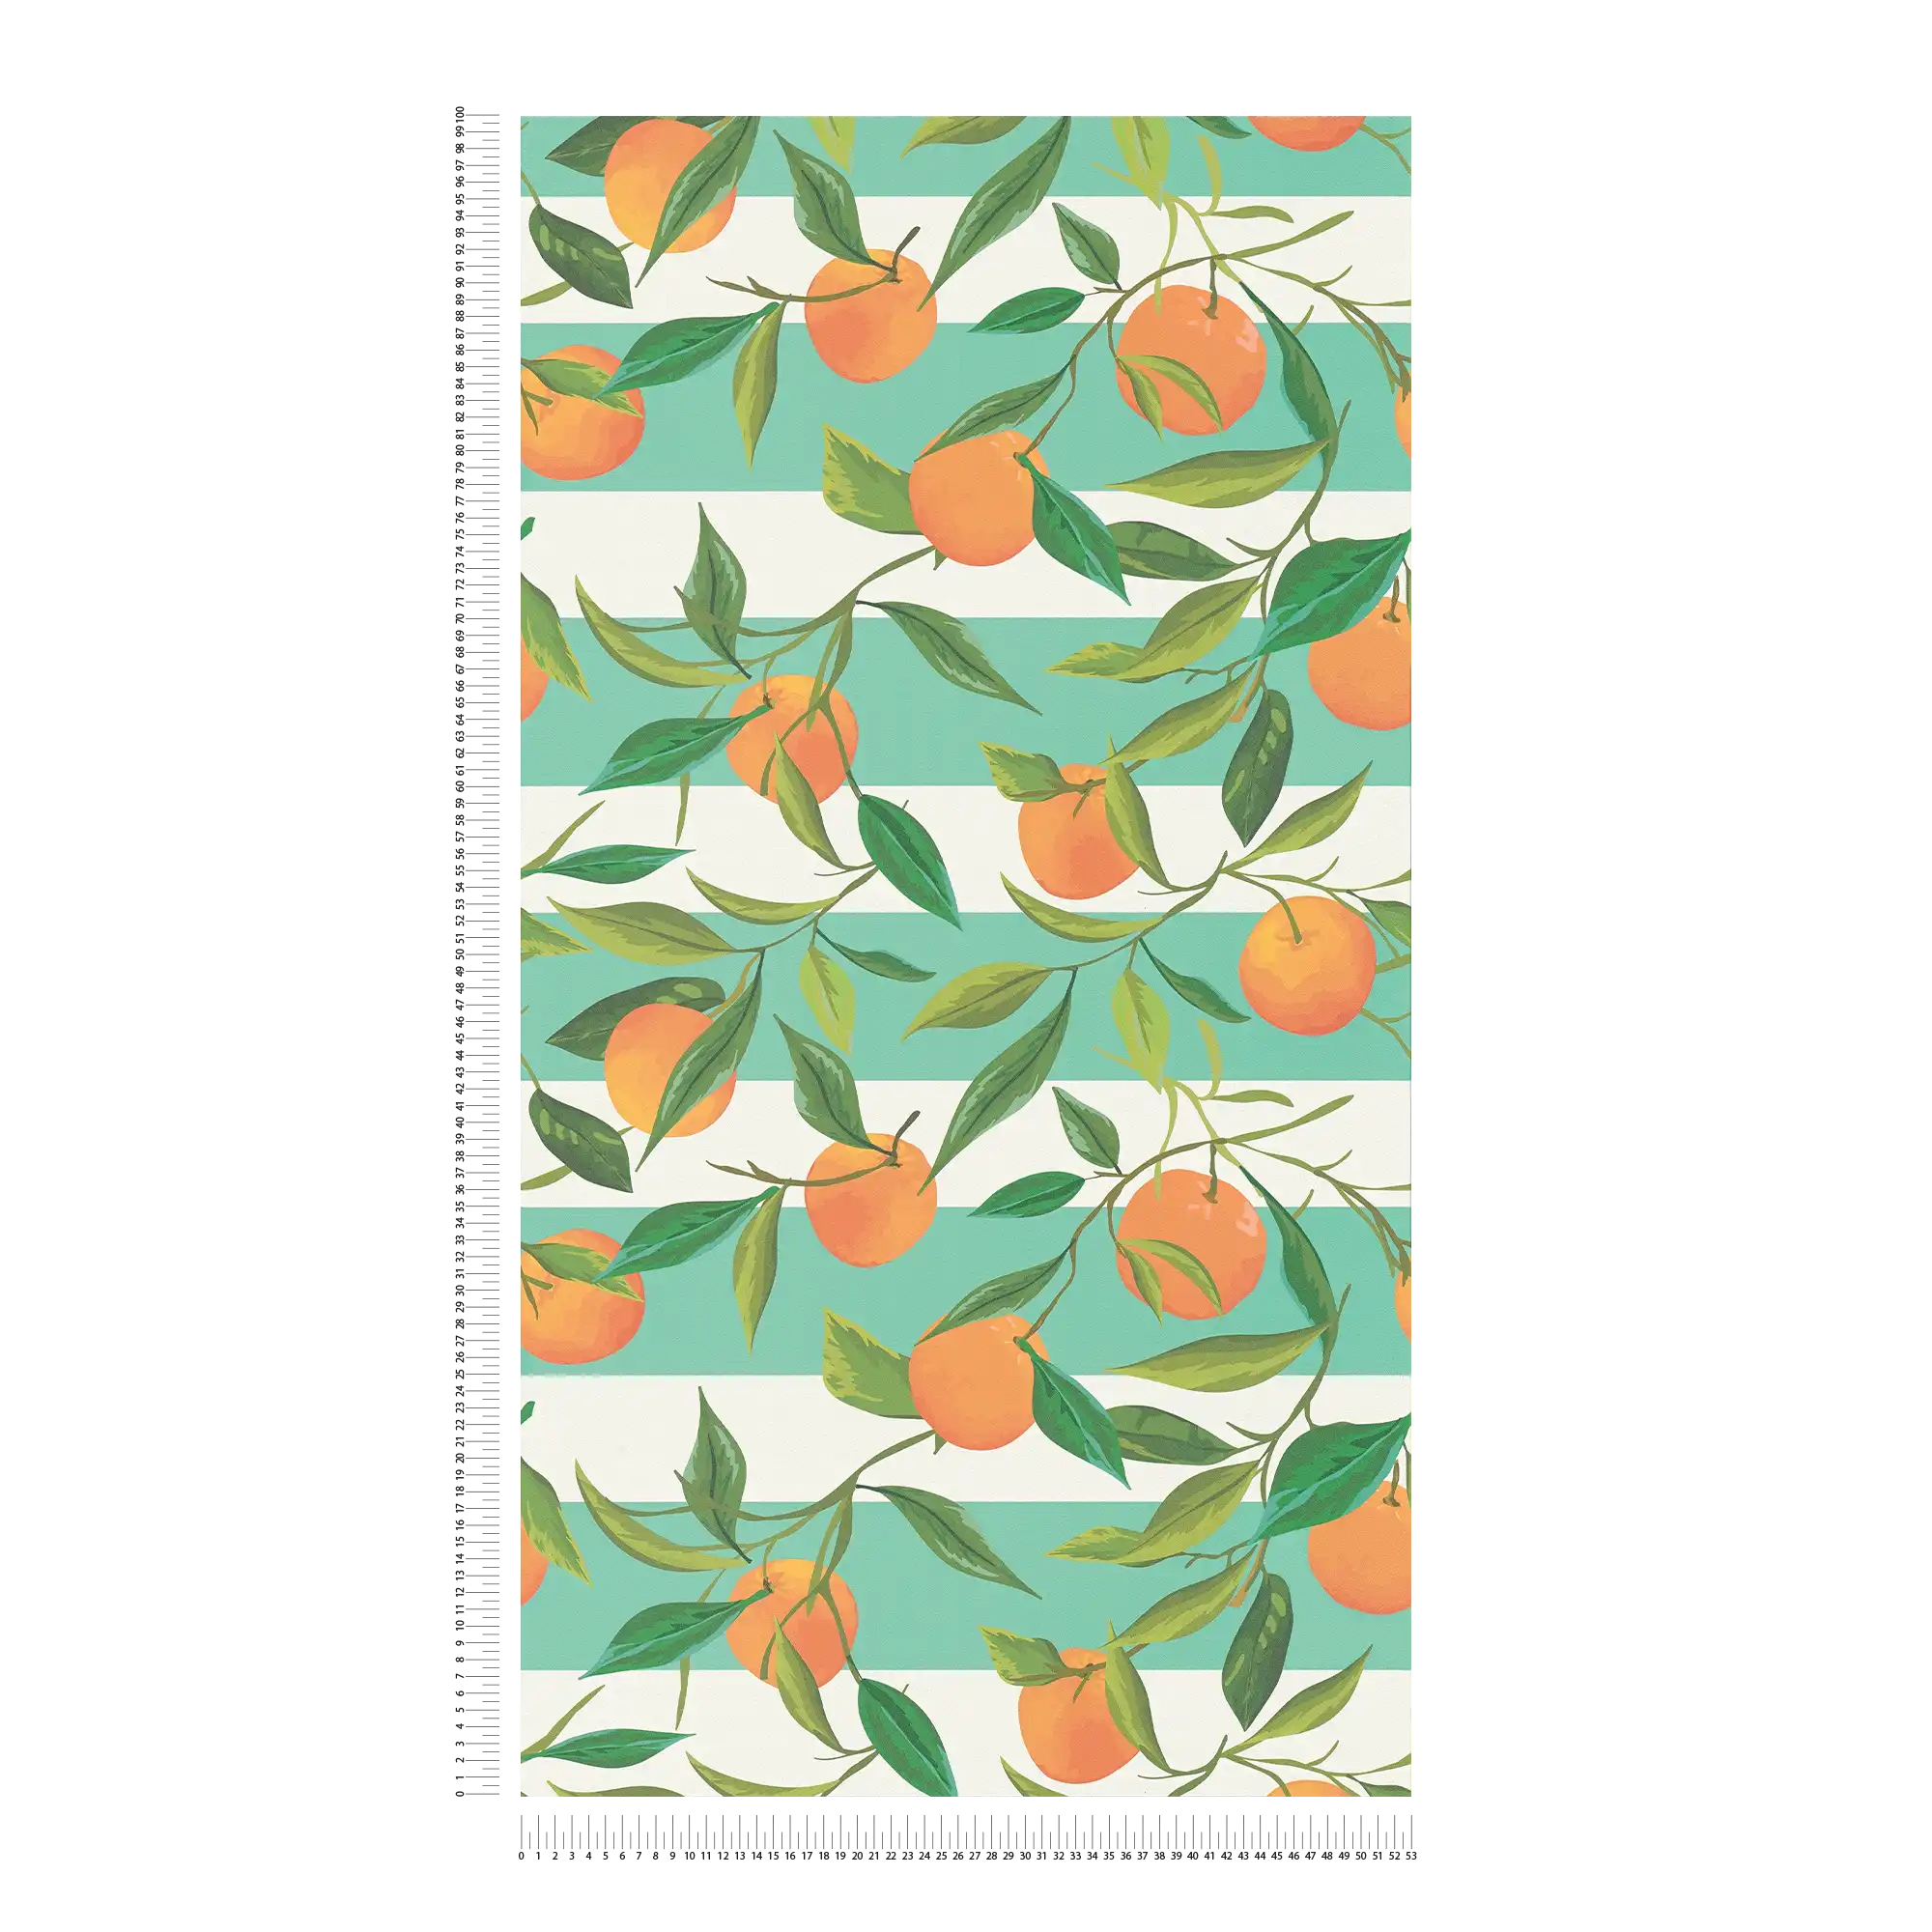             Striped non-woven wallpaper with painted oranges and leaves - turquoise, orange, green
        